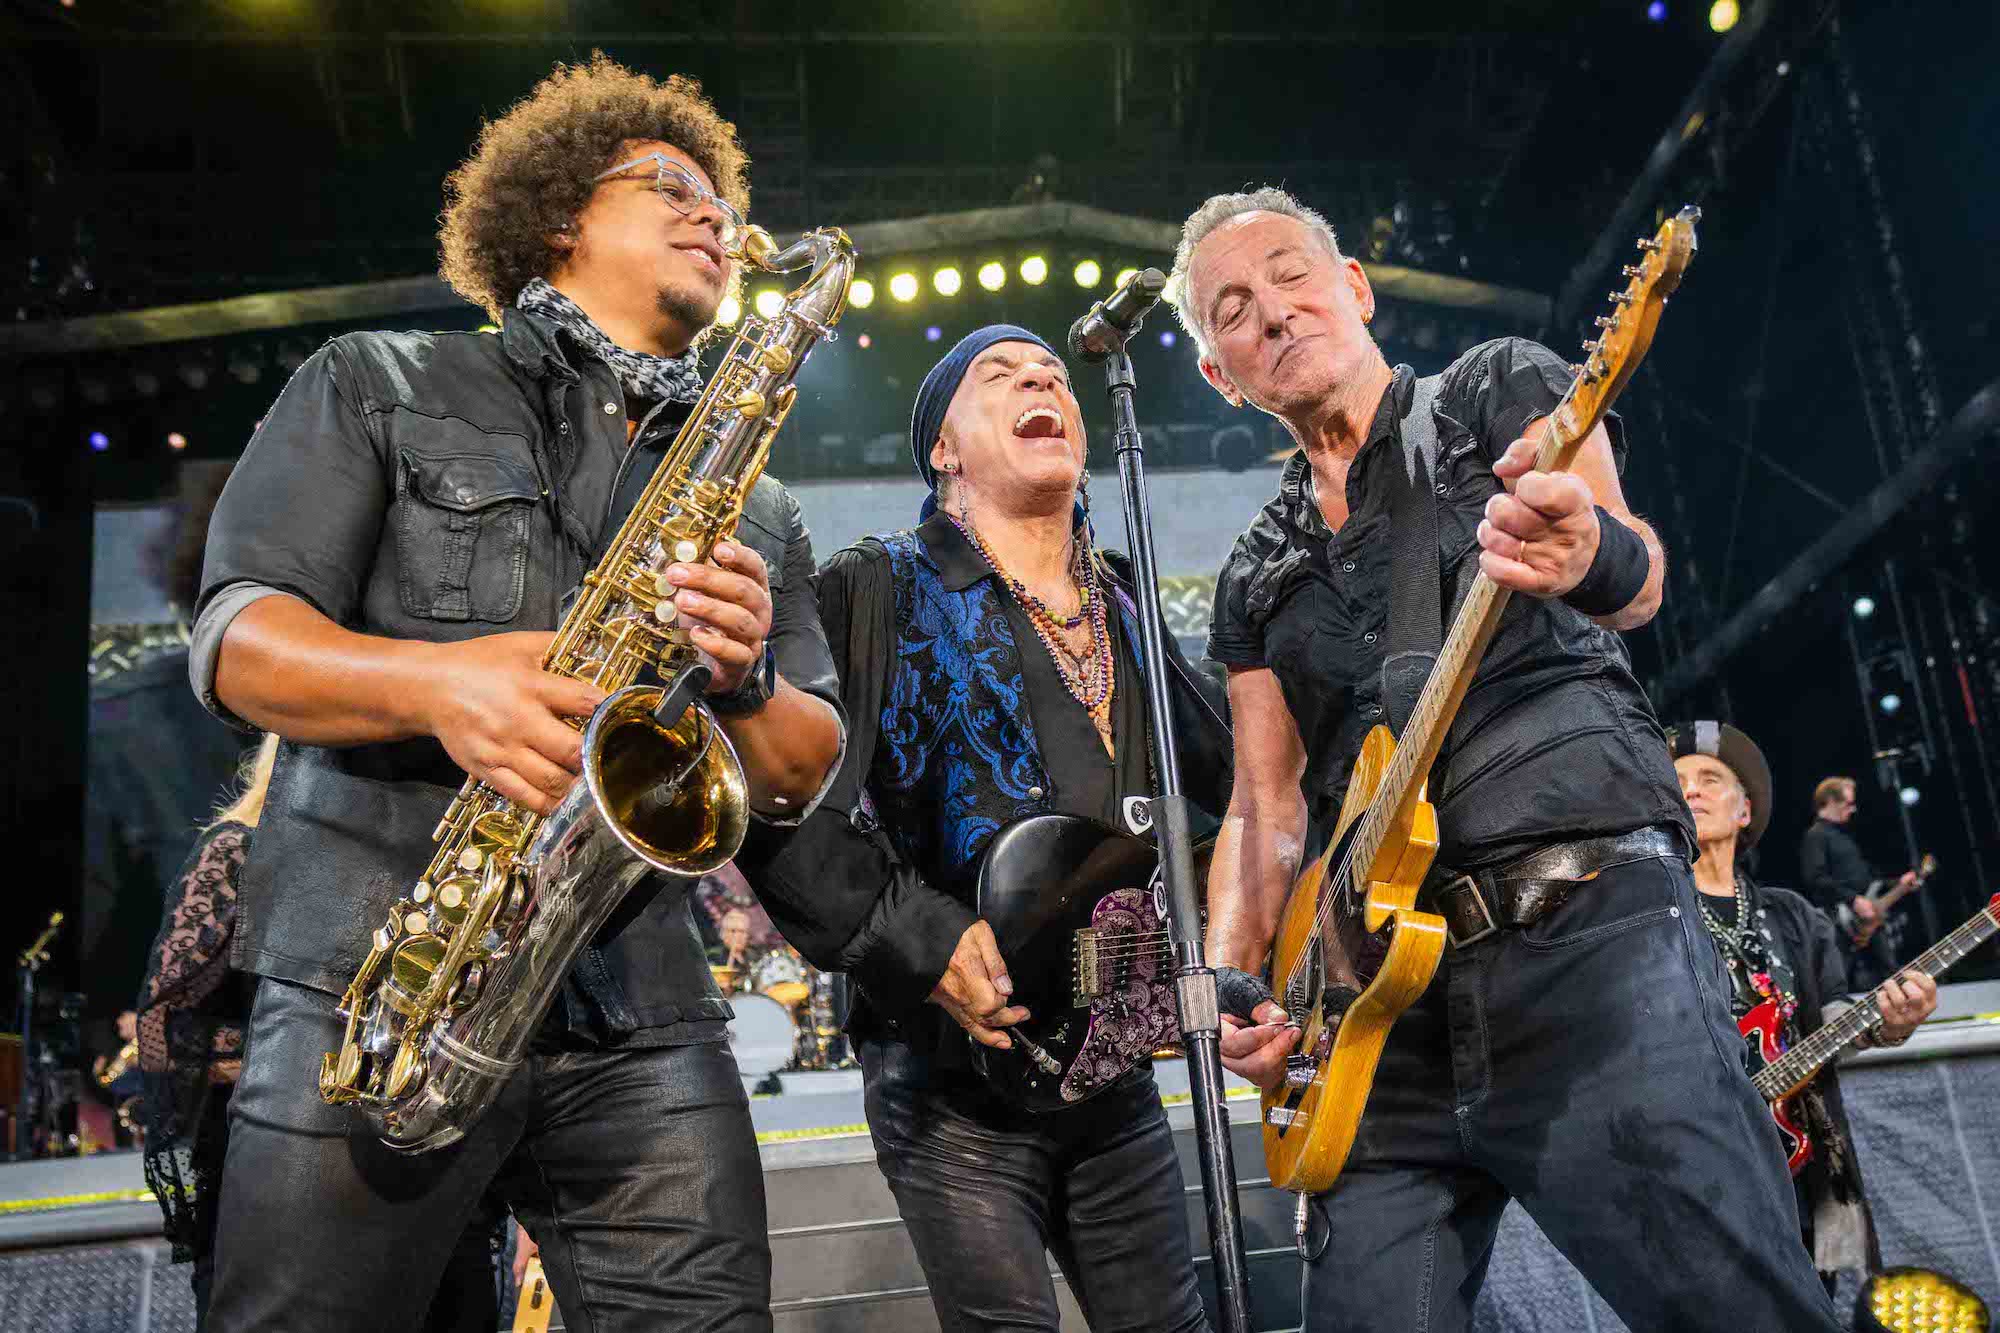 Bruce Springsteen & E Street Band at MetLife Stadium, East Rutherford, New Jersey on September 3, 2023.